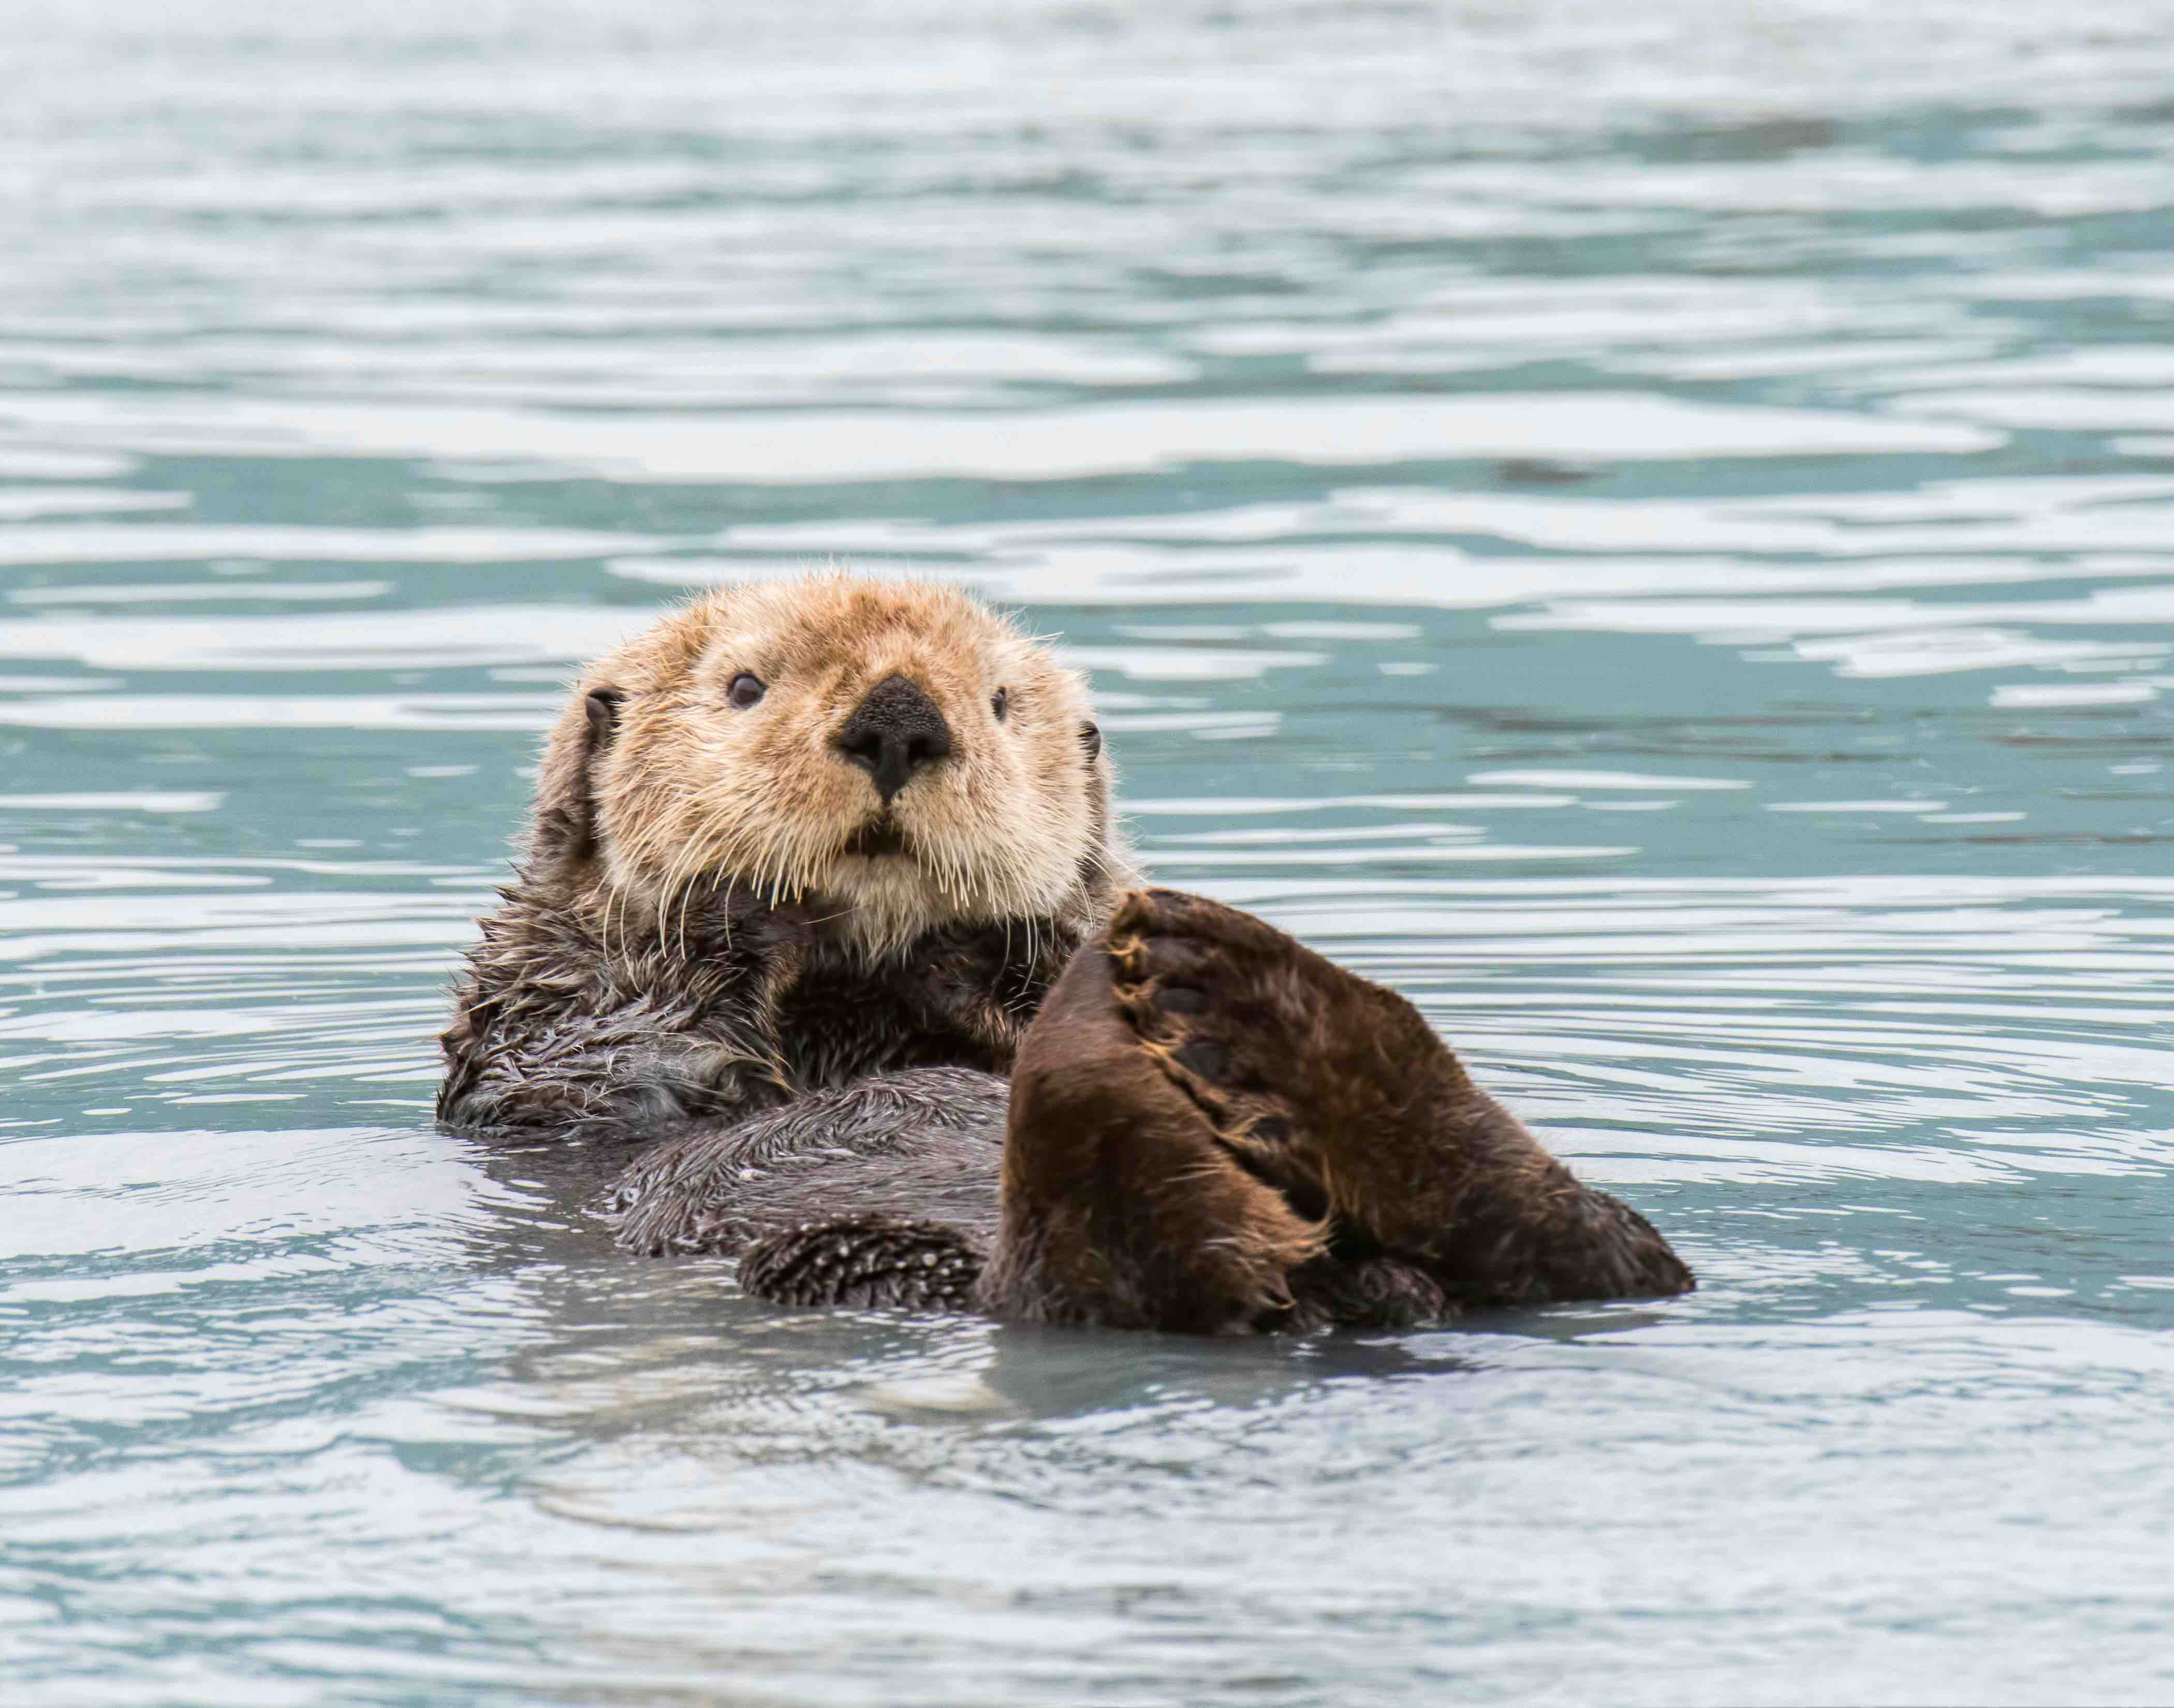 11 Sea Otter Facts For Kids Too Adorable To Miss - Facts.net